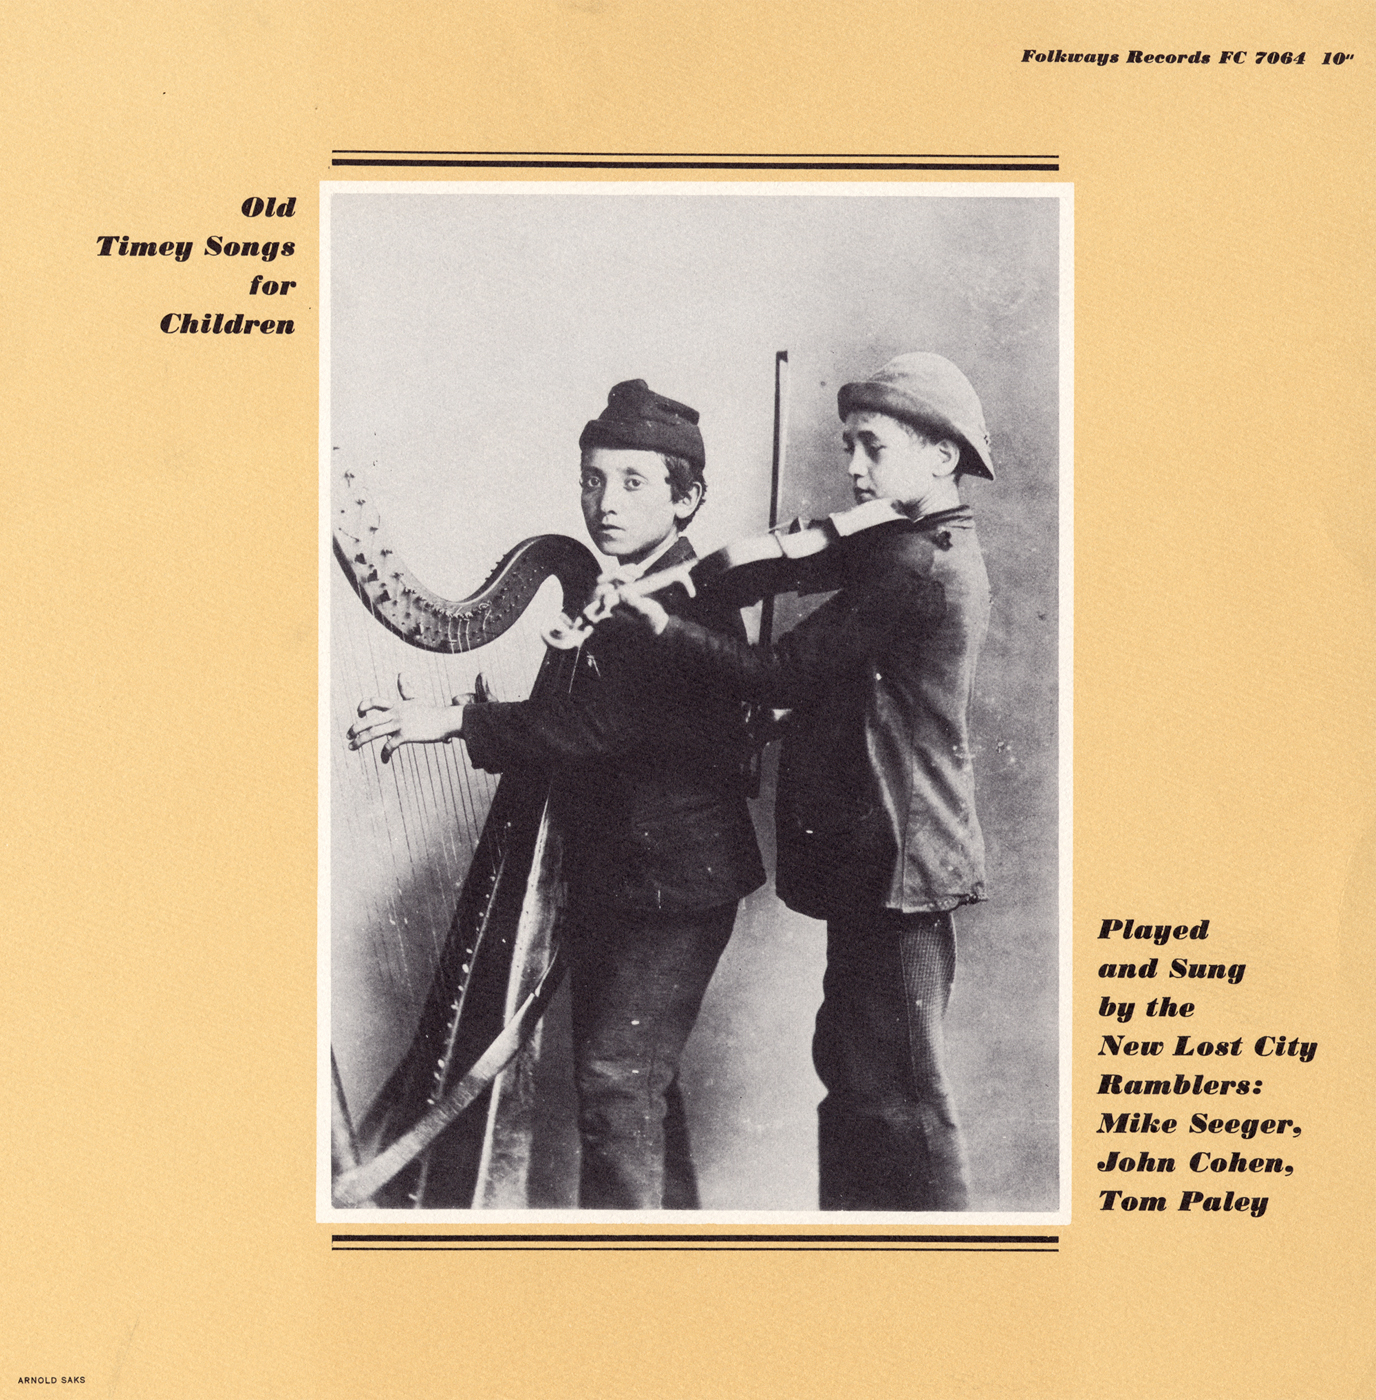 Old Timey Songs for Children | Smithsonian Folkways Recordings